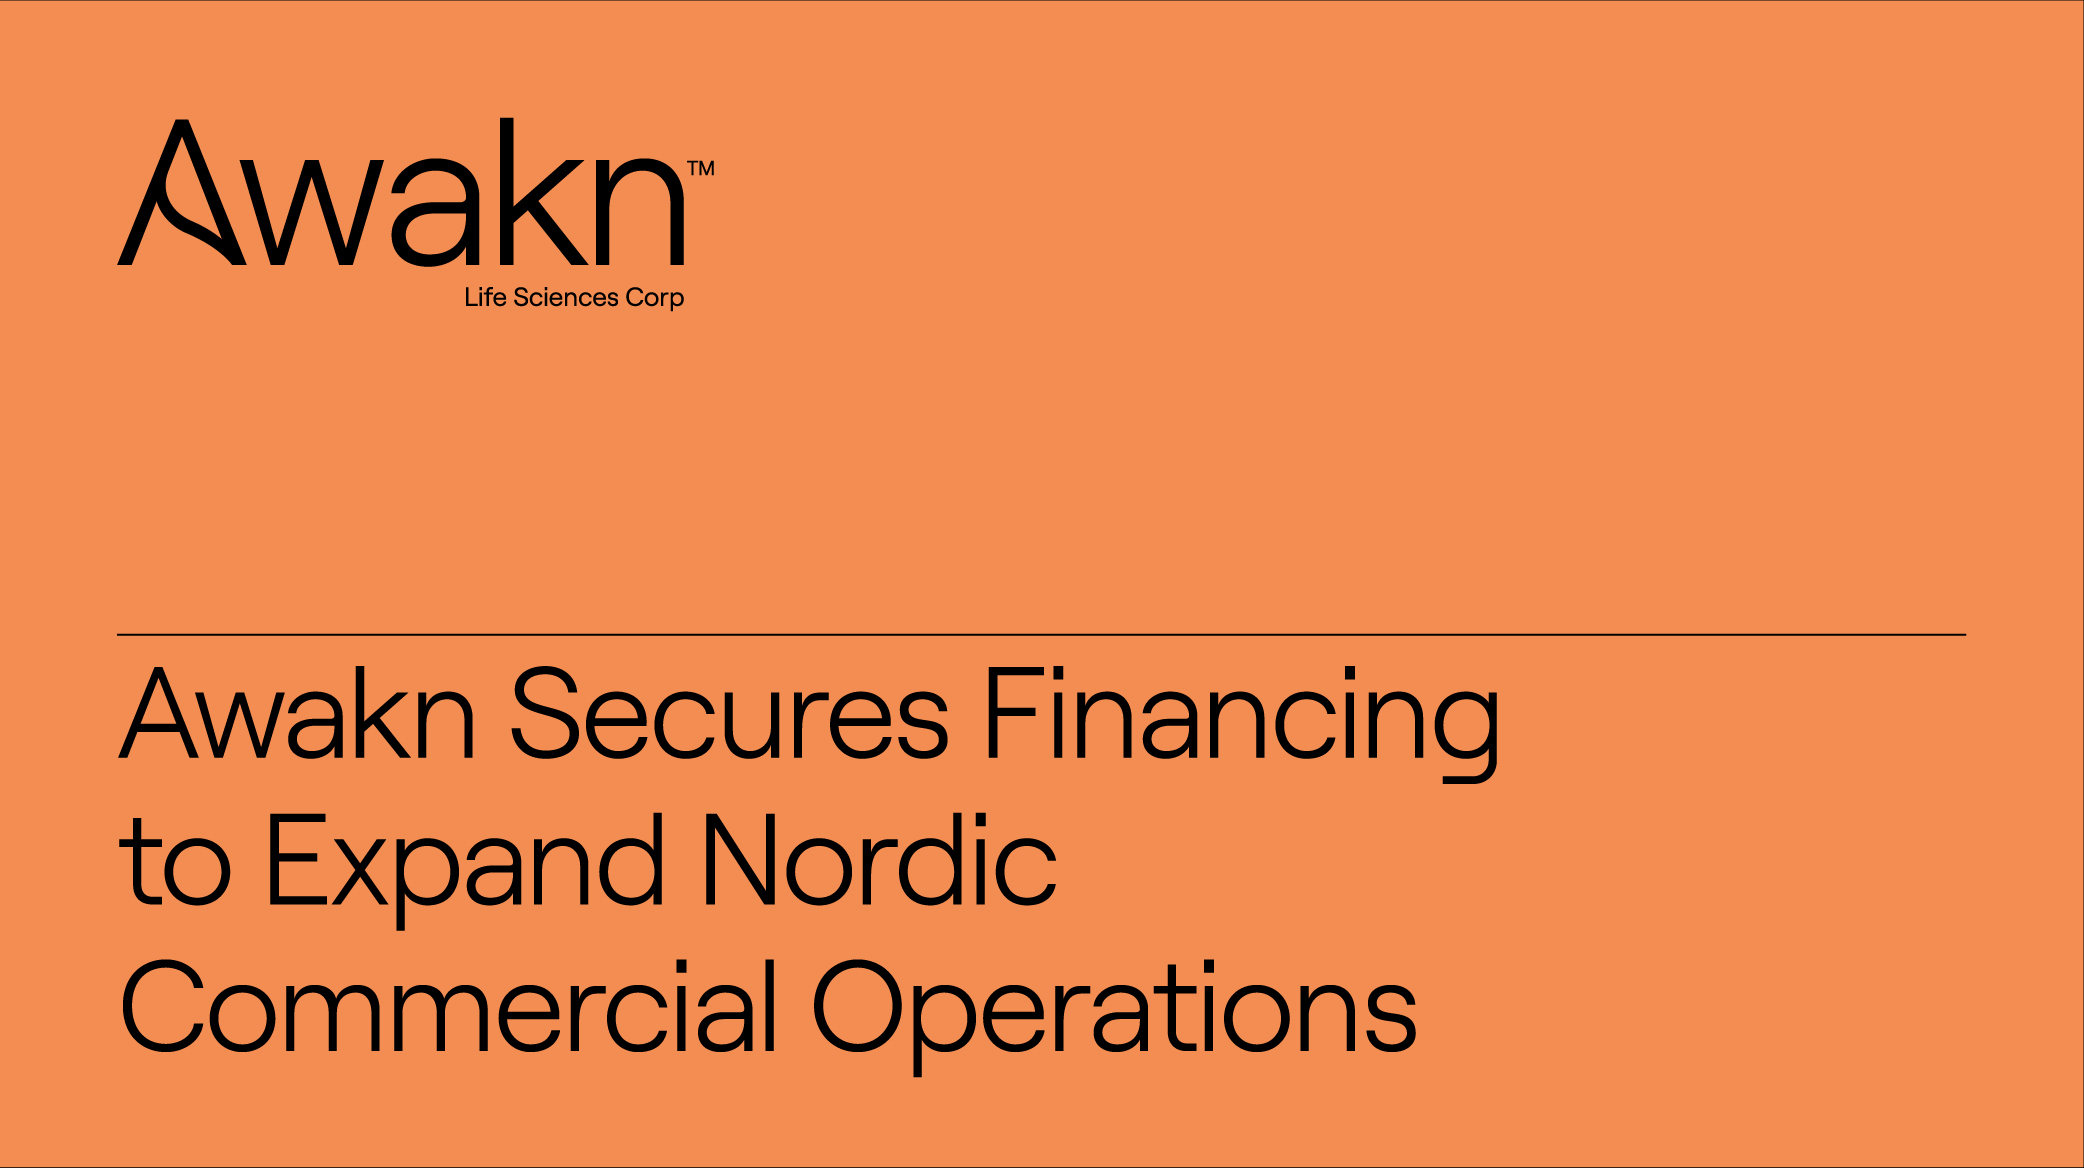 Awakn Life Sciences Secures Financing to Expand Nordic Commercial Operations